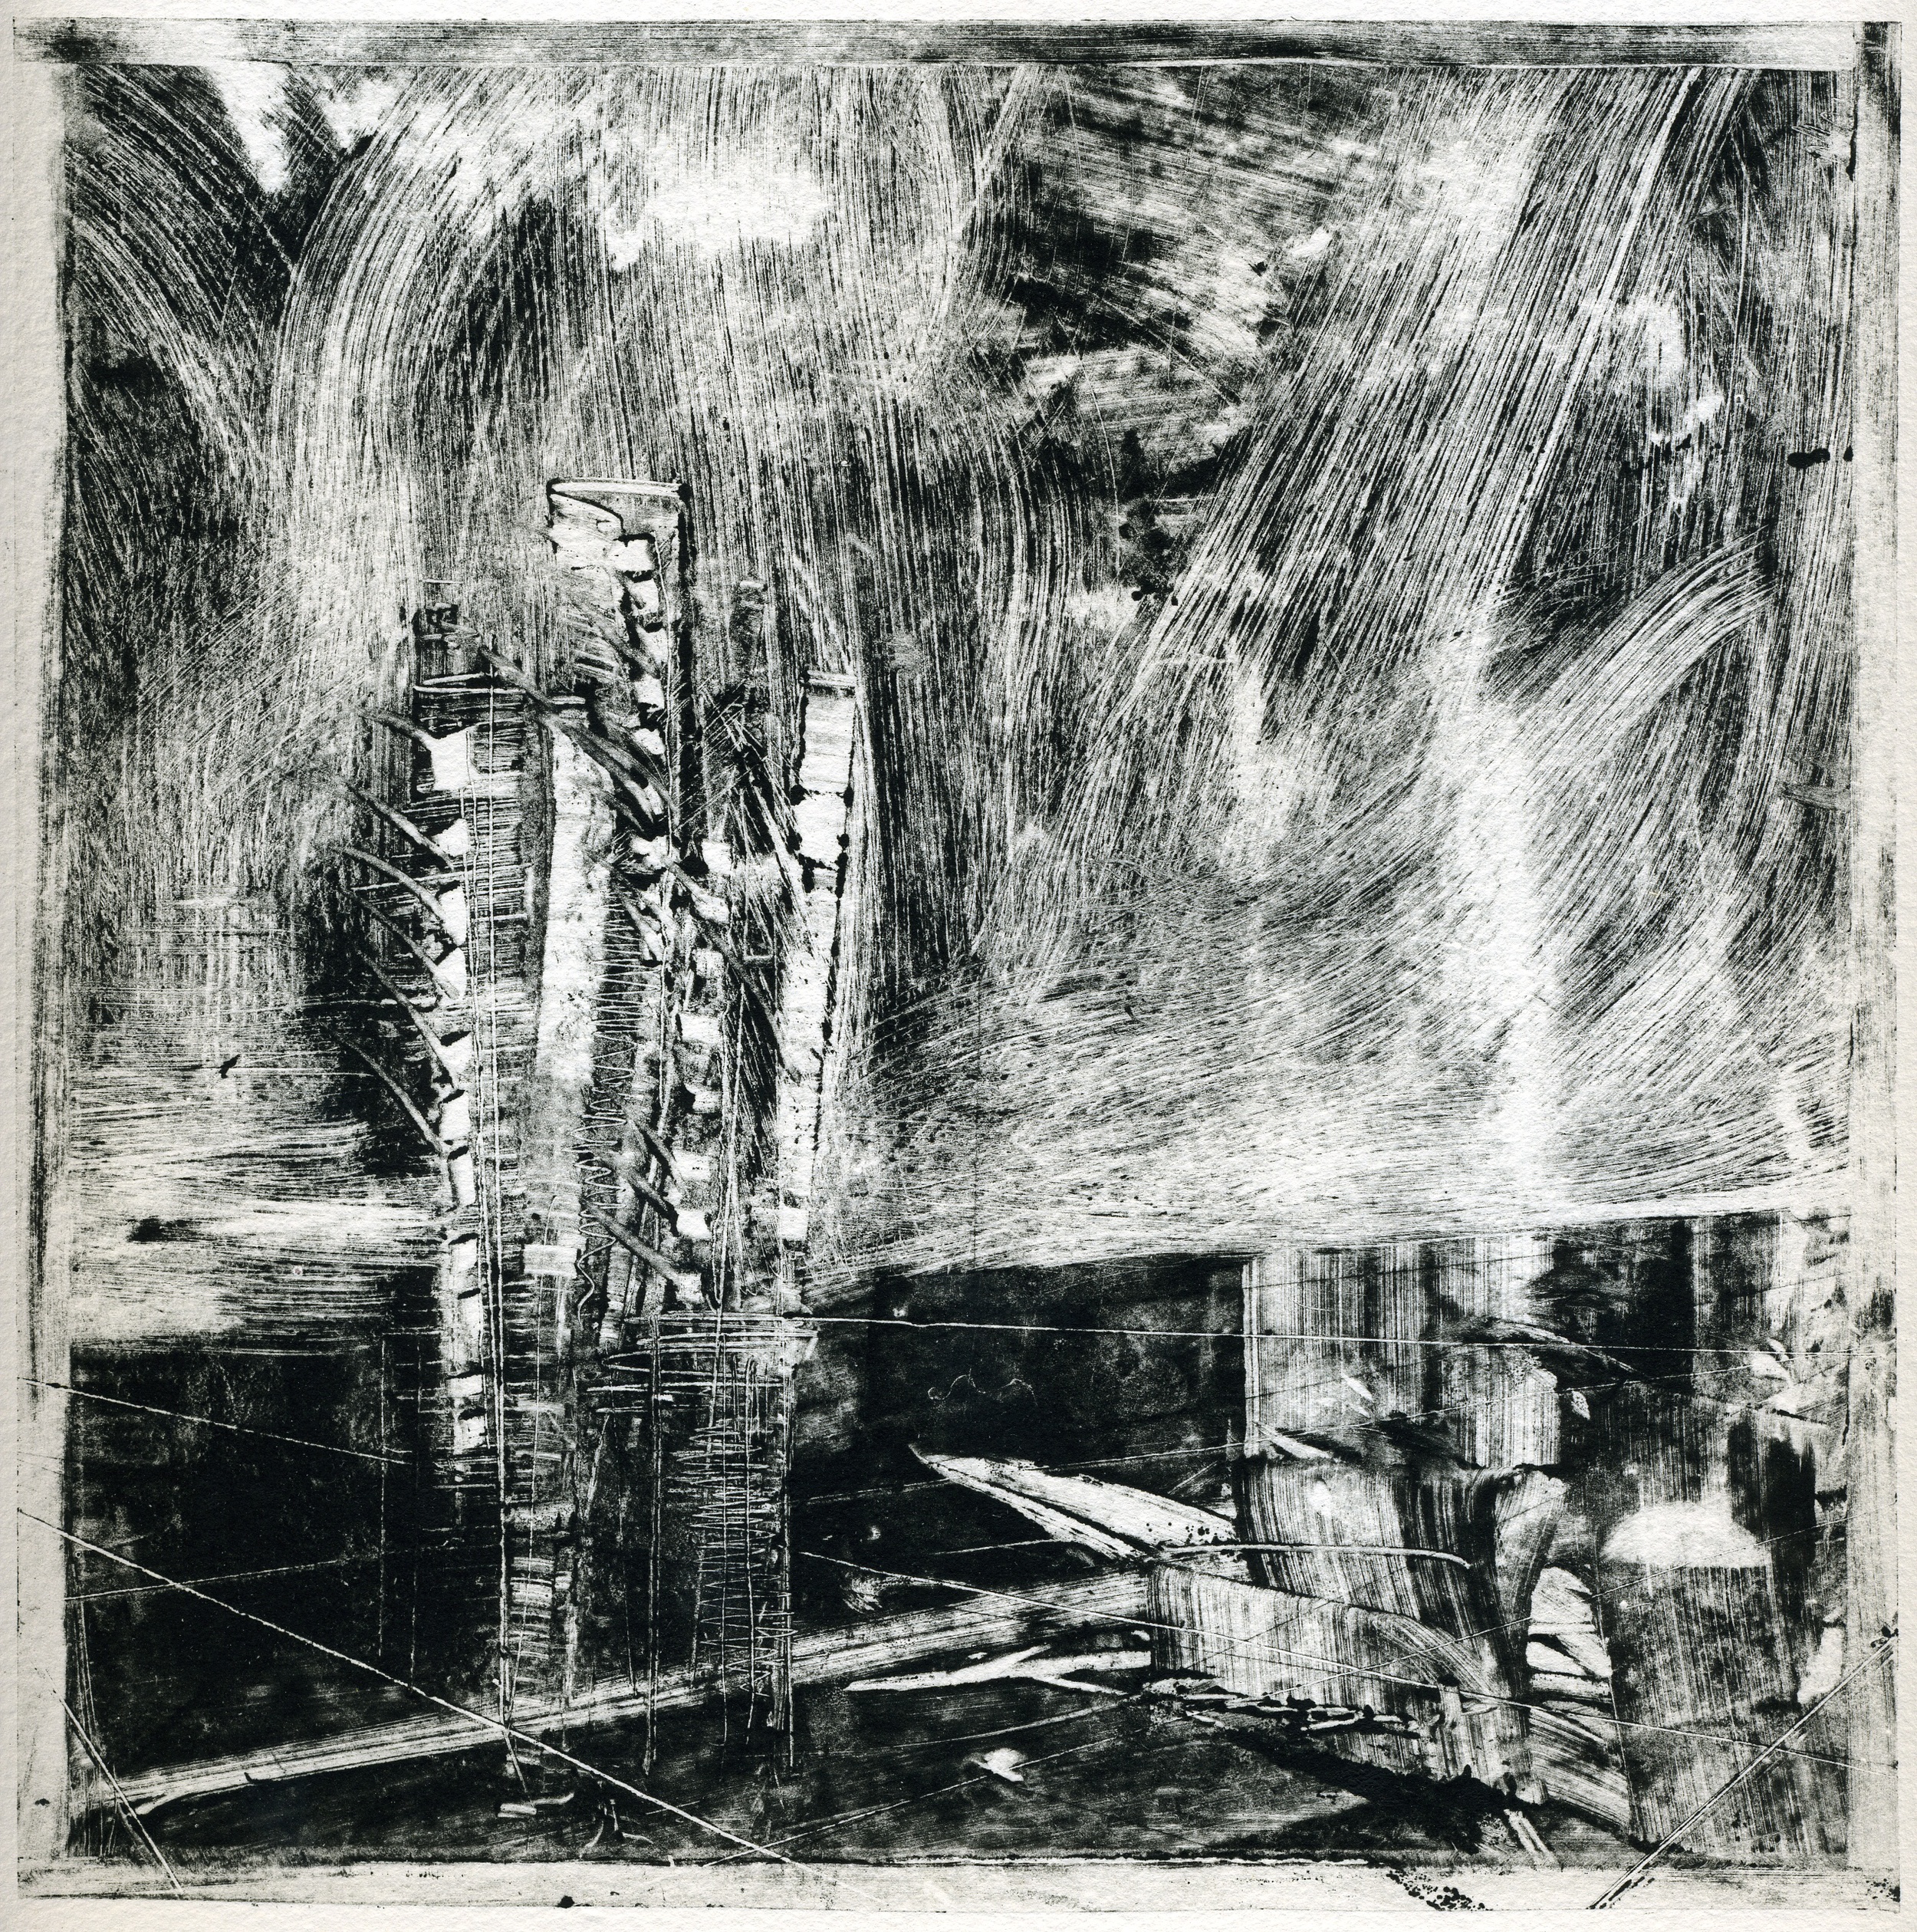  A monotype print by Clive Knights from his Lunigiana series 